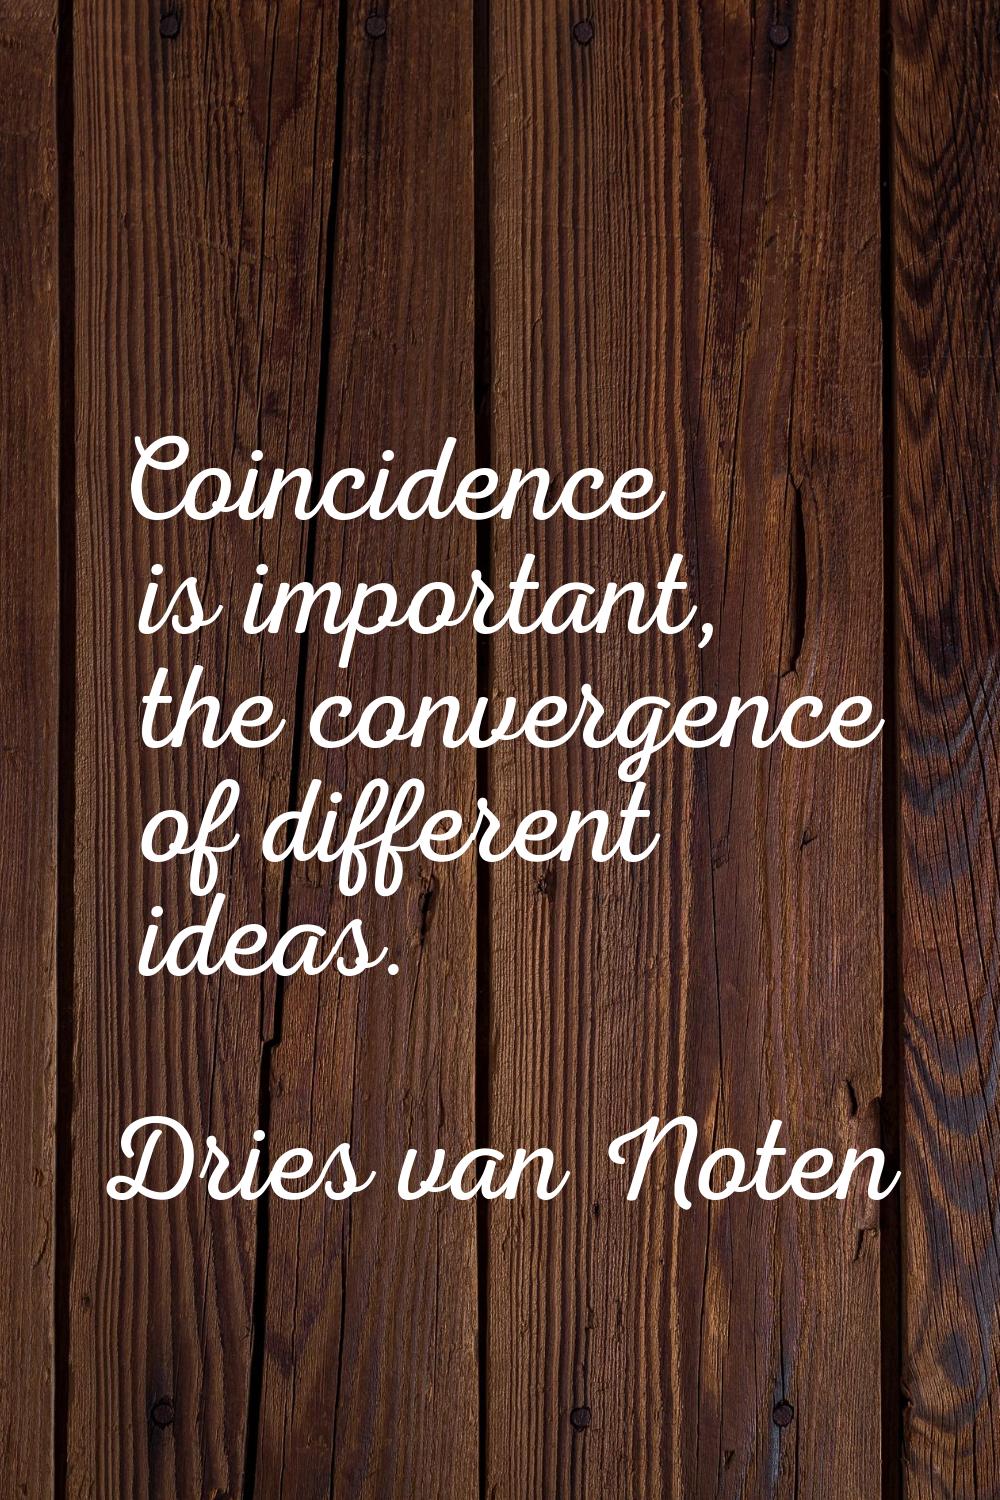 Coincidence is important, the convergence of different ideas.